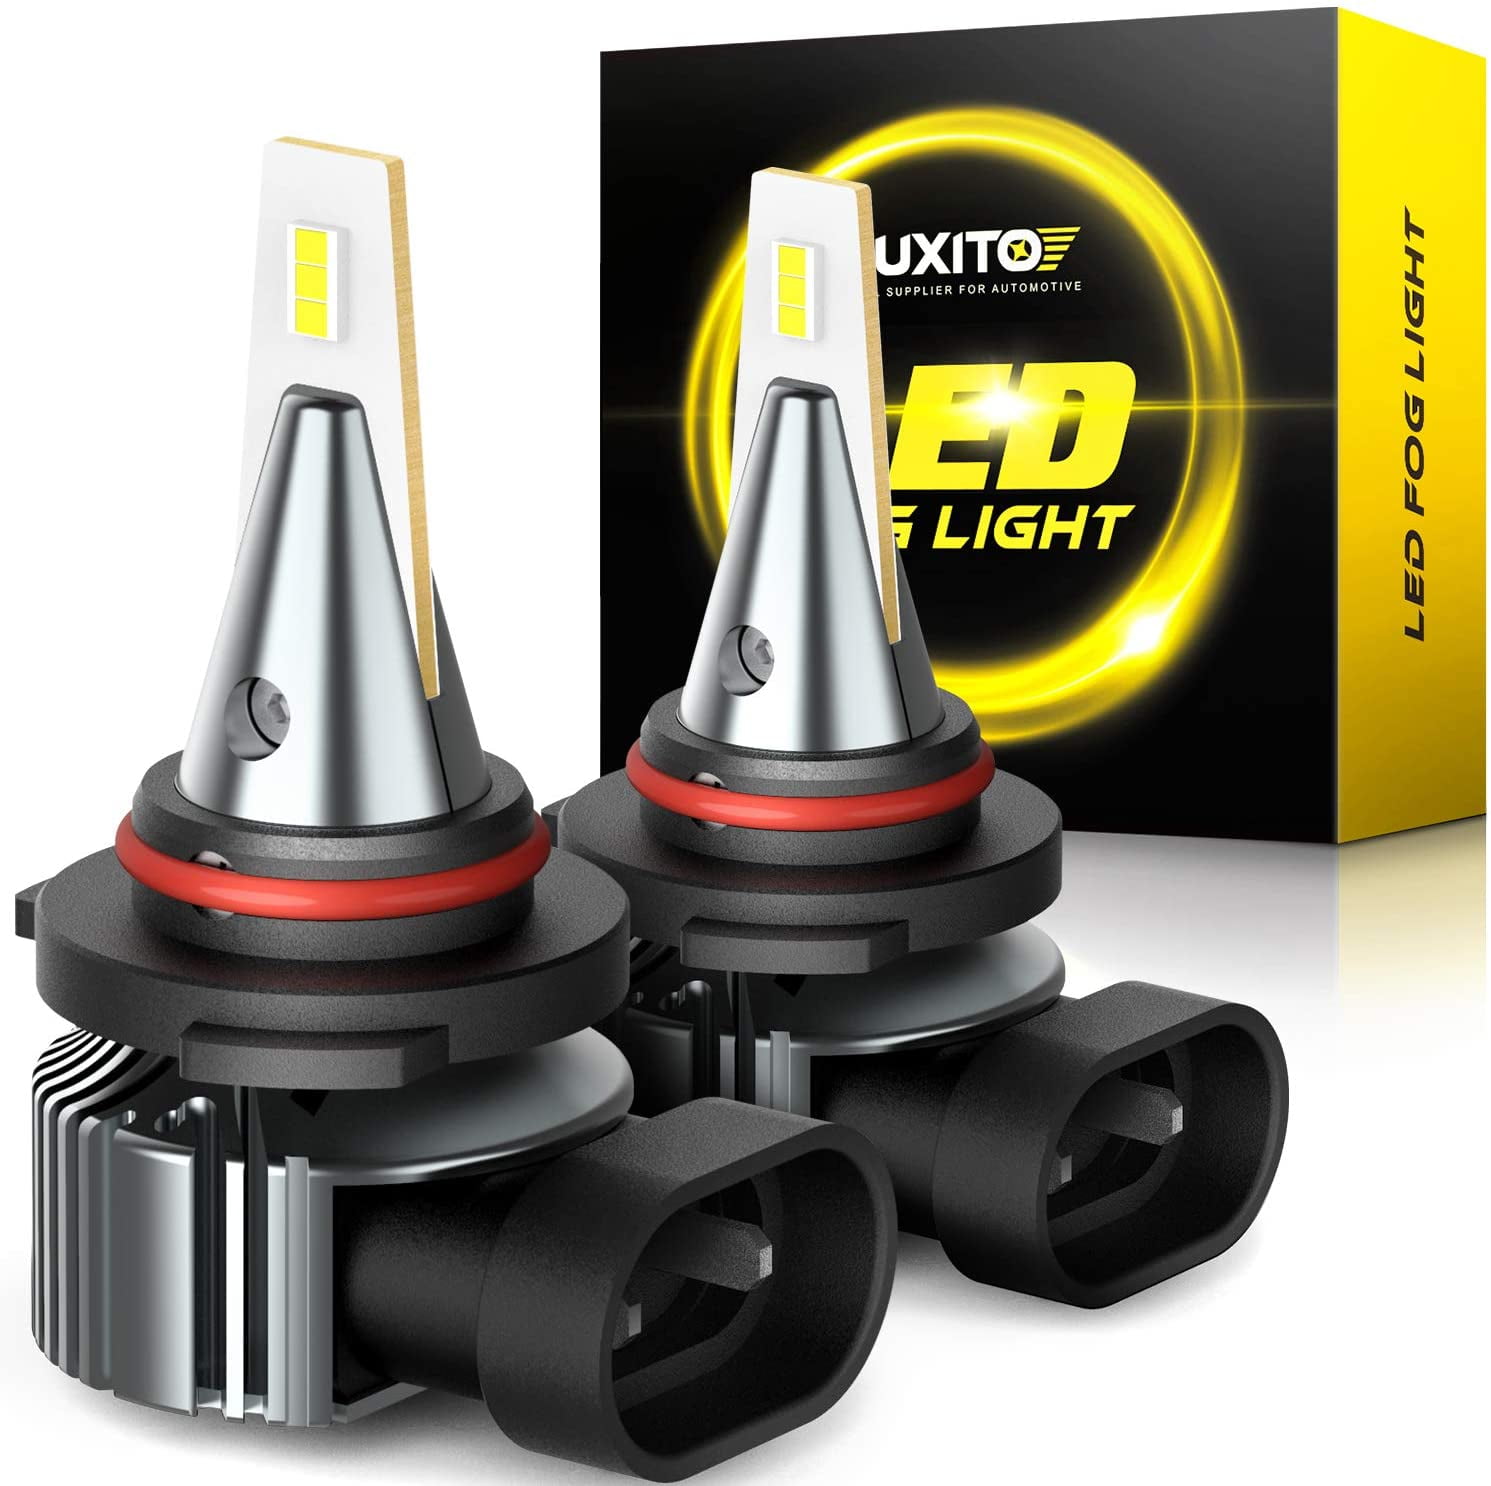 Pack of 2 OXILAM 9145 9140 H10 LED Fog Light Bulbs Super Bright 2600 Lumens CSP Chipset for Fog-Lights or DRL Replacement 6000K Xenon White 